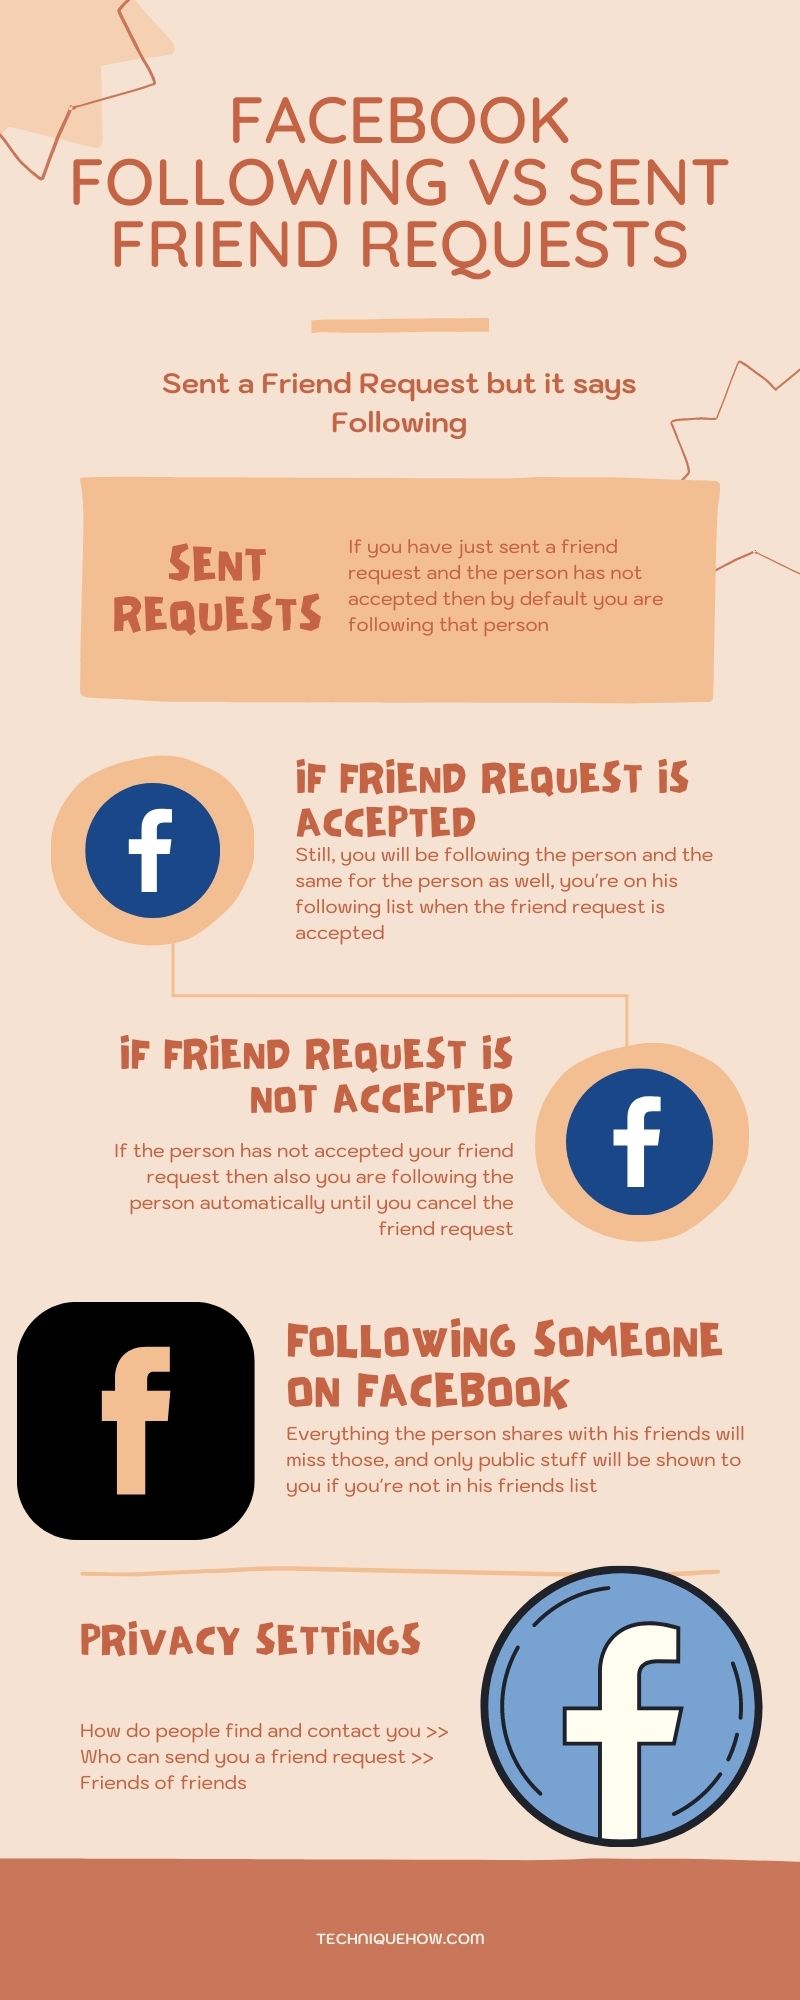 infographic_Following on Facebook but Sent Friend Request